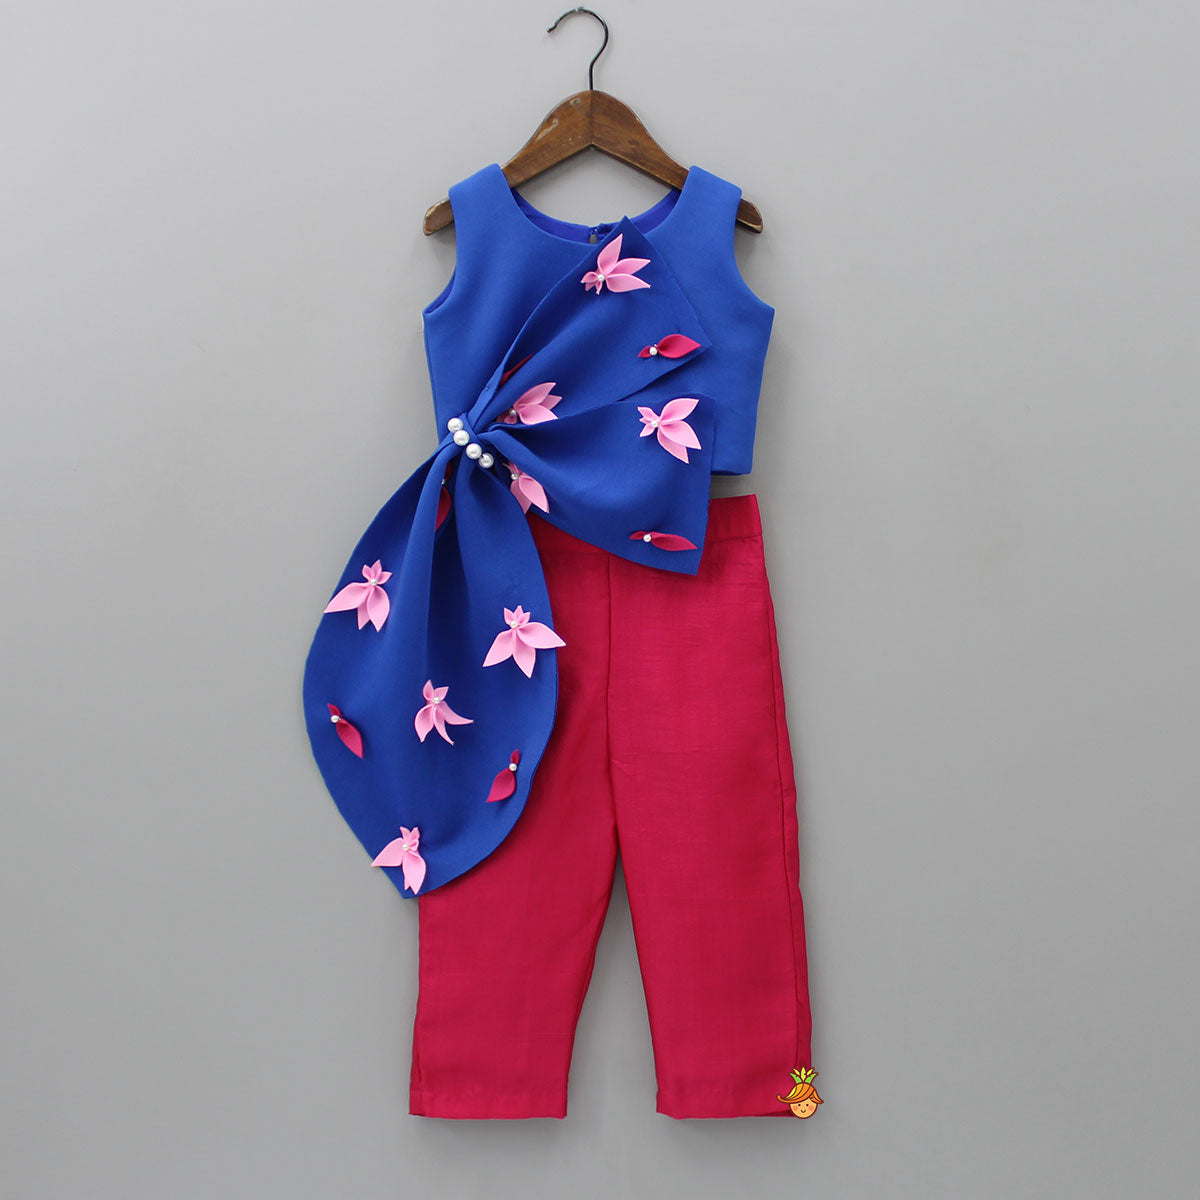 Oversized Bowie Royal Blue Stylish Top And Fuchsia Pink Pant